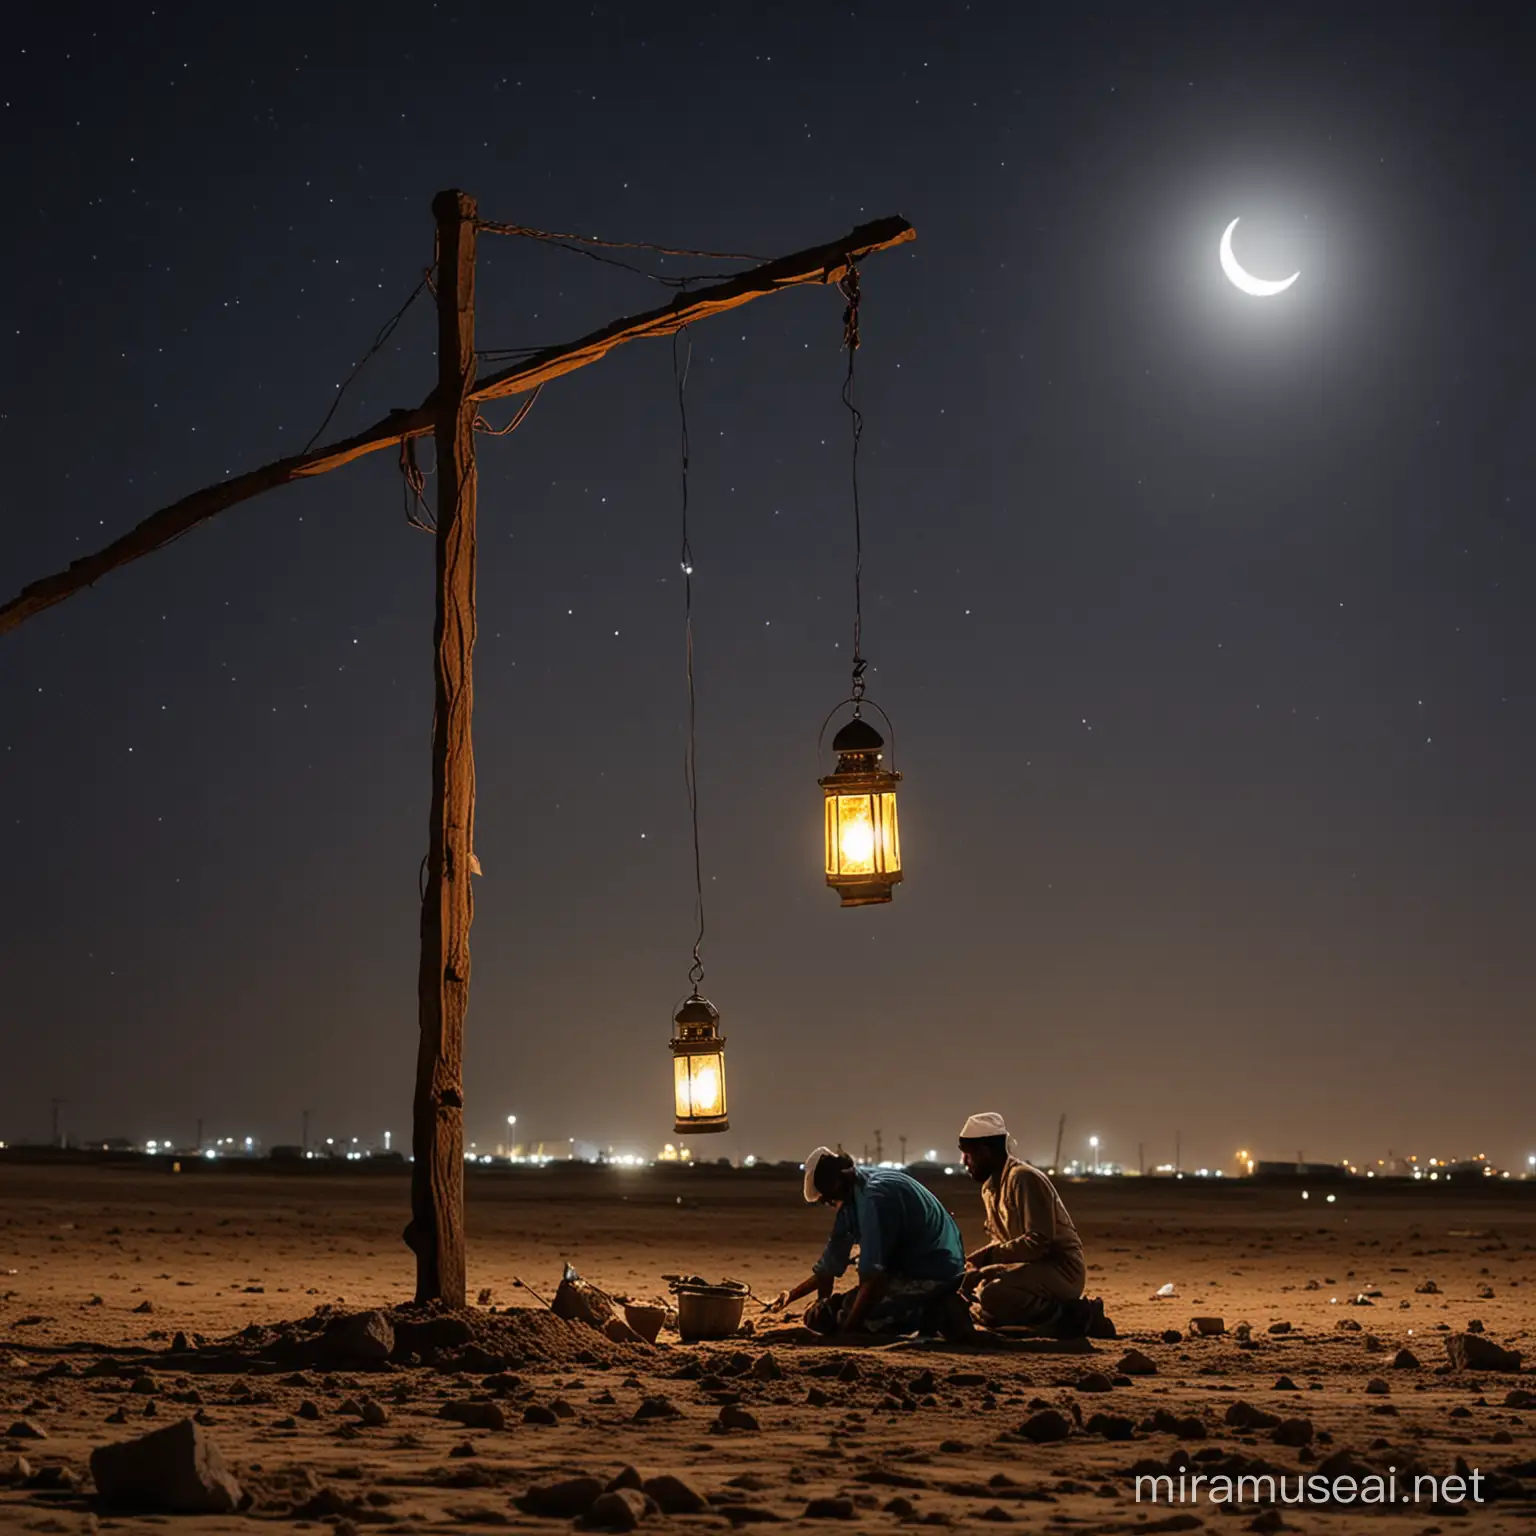 Crescent moon as subject, engineering workers working on the ground, ramadan mood, small lanterns hanging.